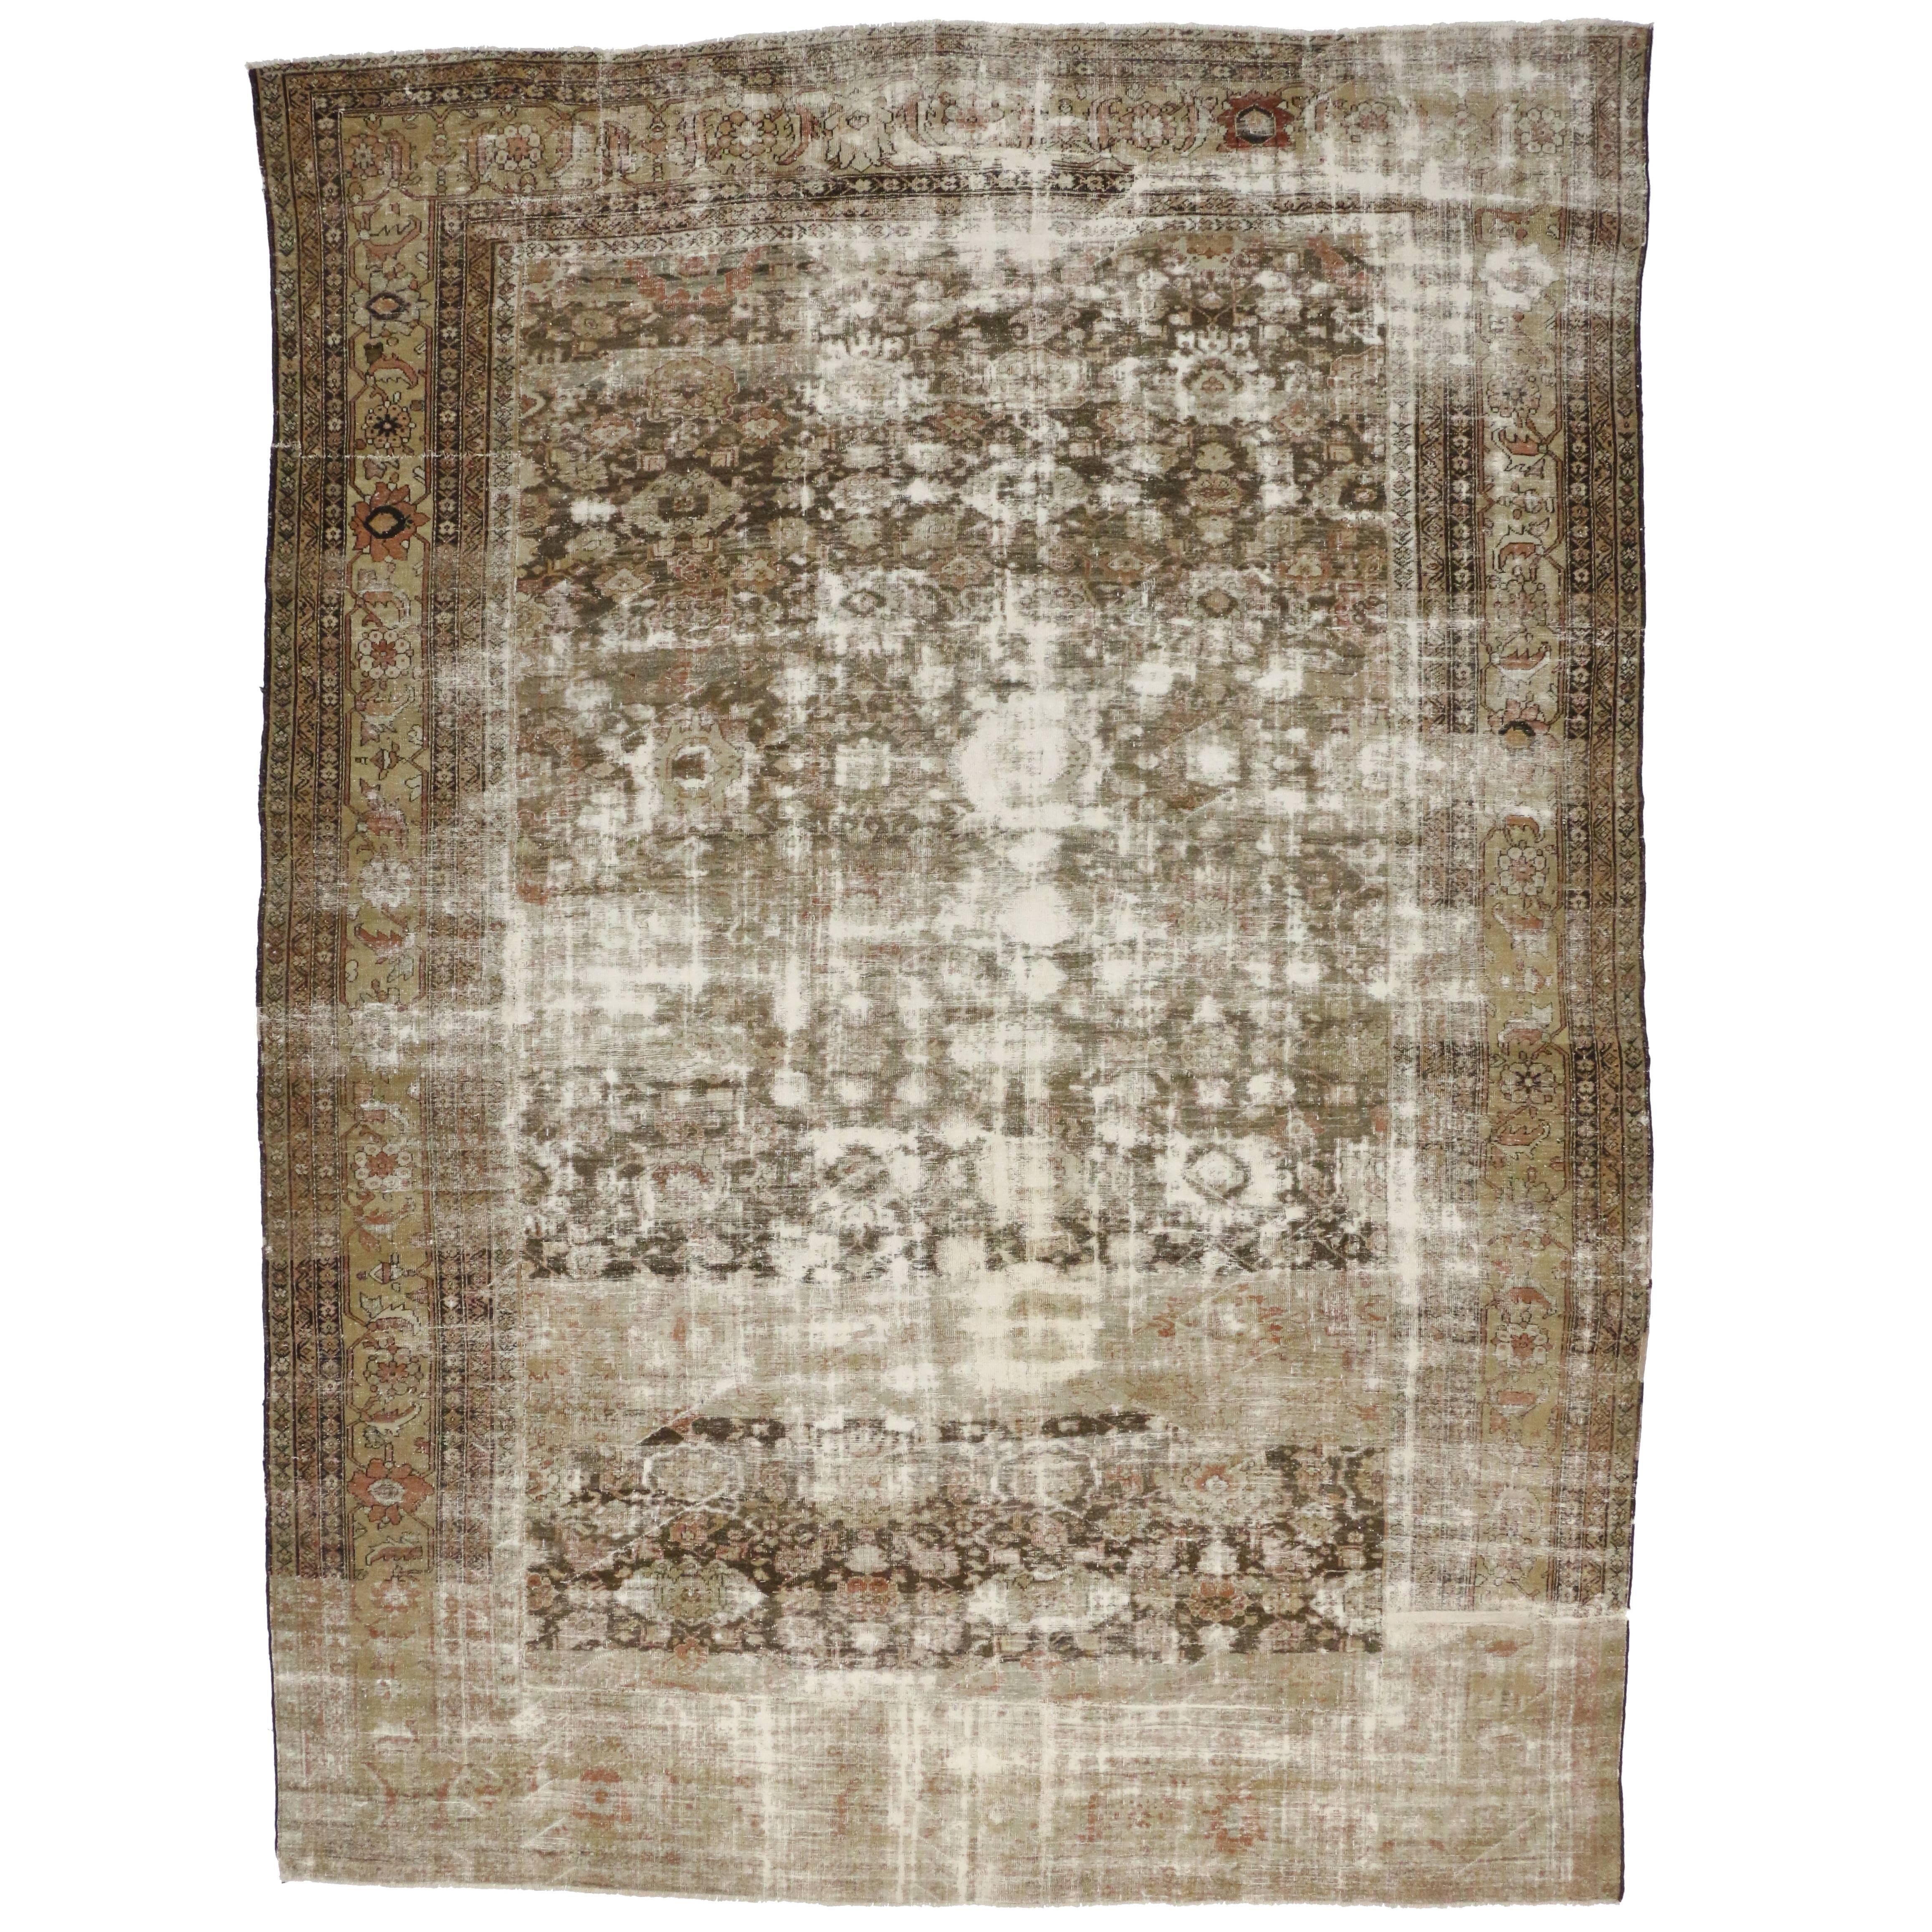 Distressed Antique Persian Sultanabad Rug, Rustic Charm Meets Weathered Finesse